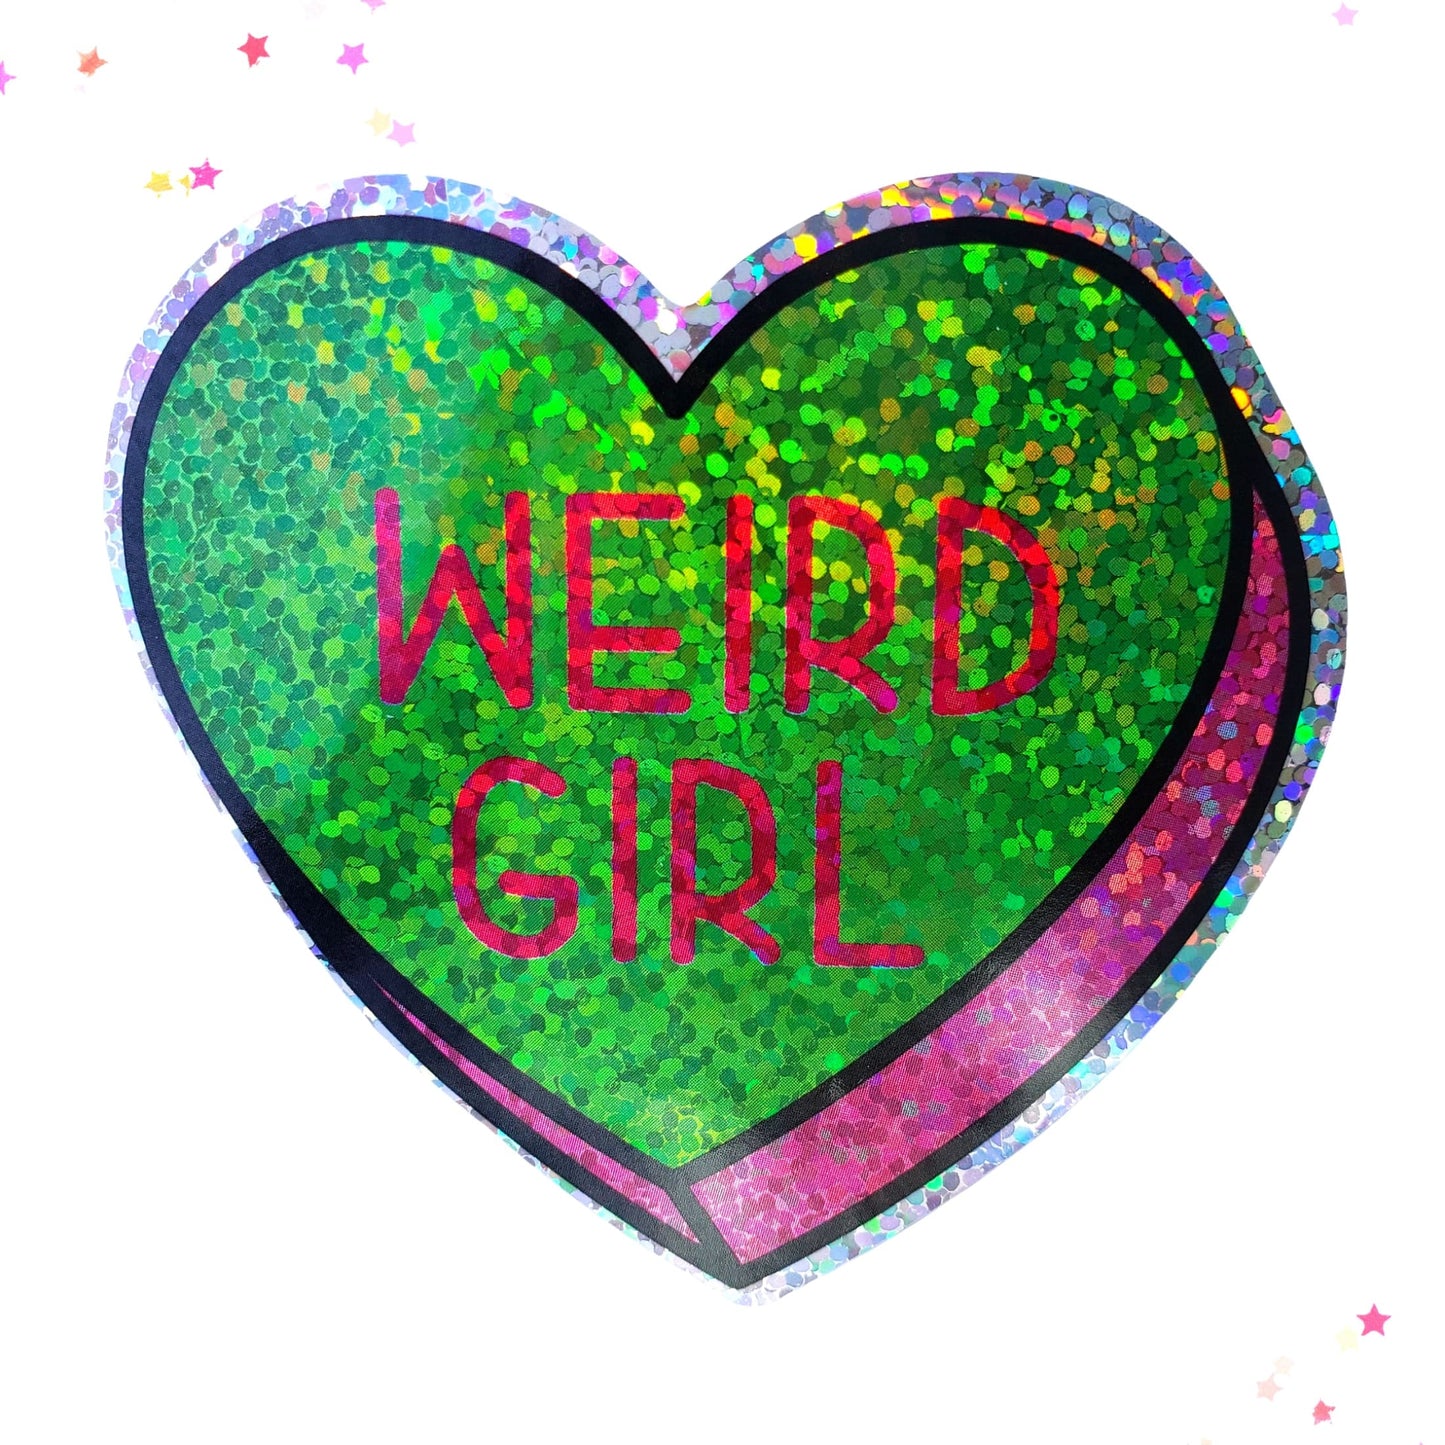 Premium Sticker - Sparkly Holographic Glitter Weird Girl from Confetti Kitty, Only 2.00